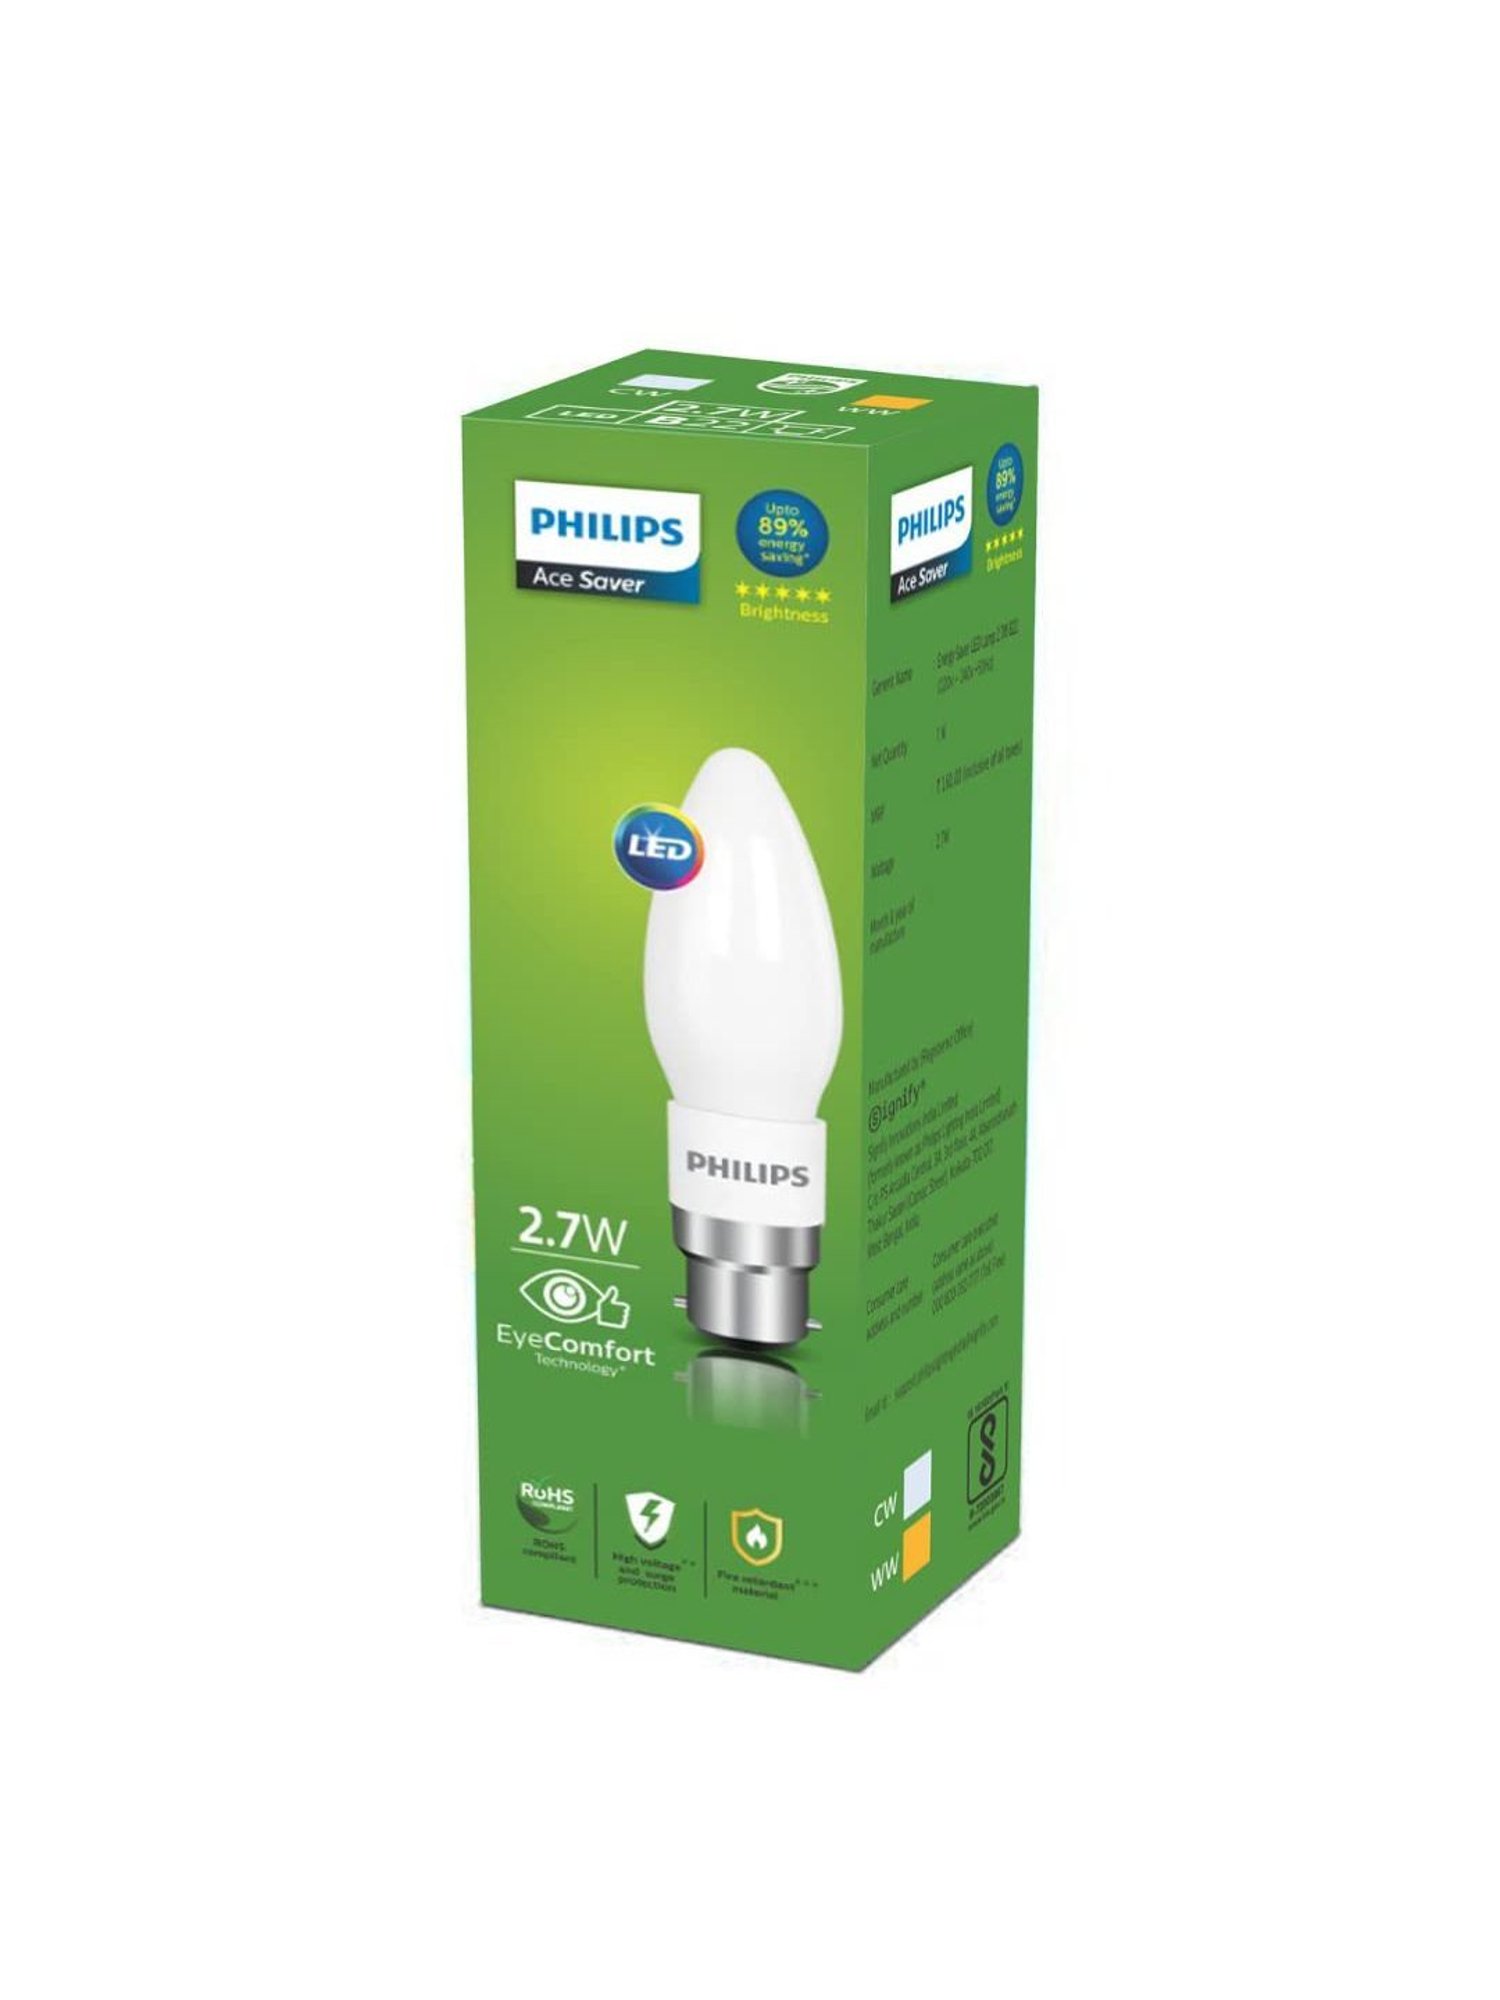 Philips ProfileShine 5 Mtr LED Profile Light for Ceiling & Home Decoration  (Natural White)